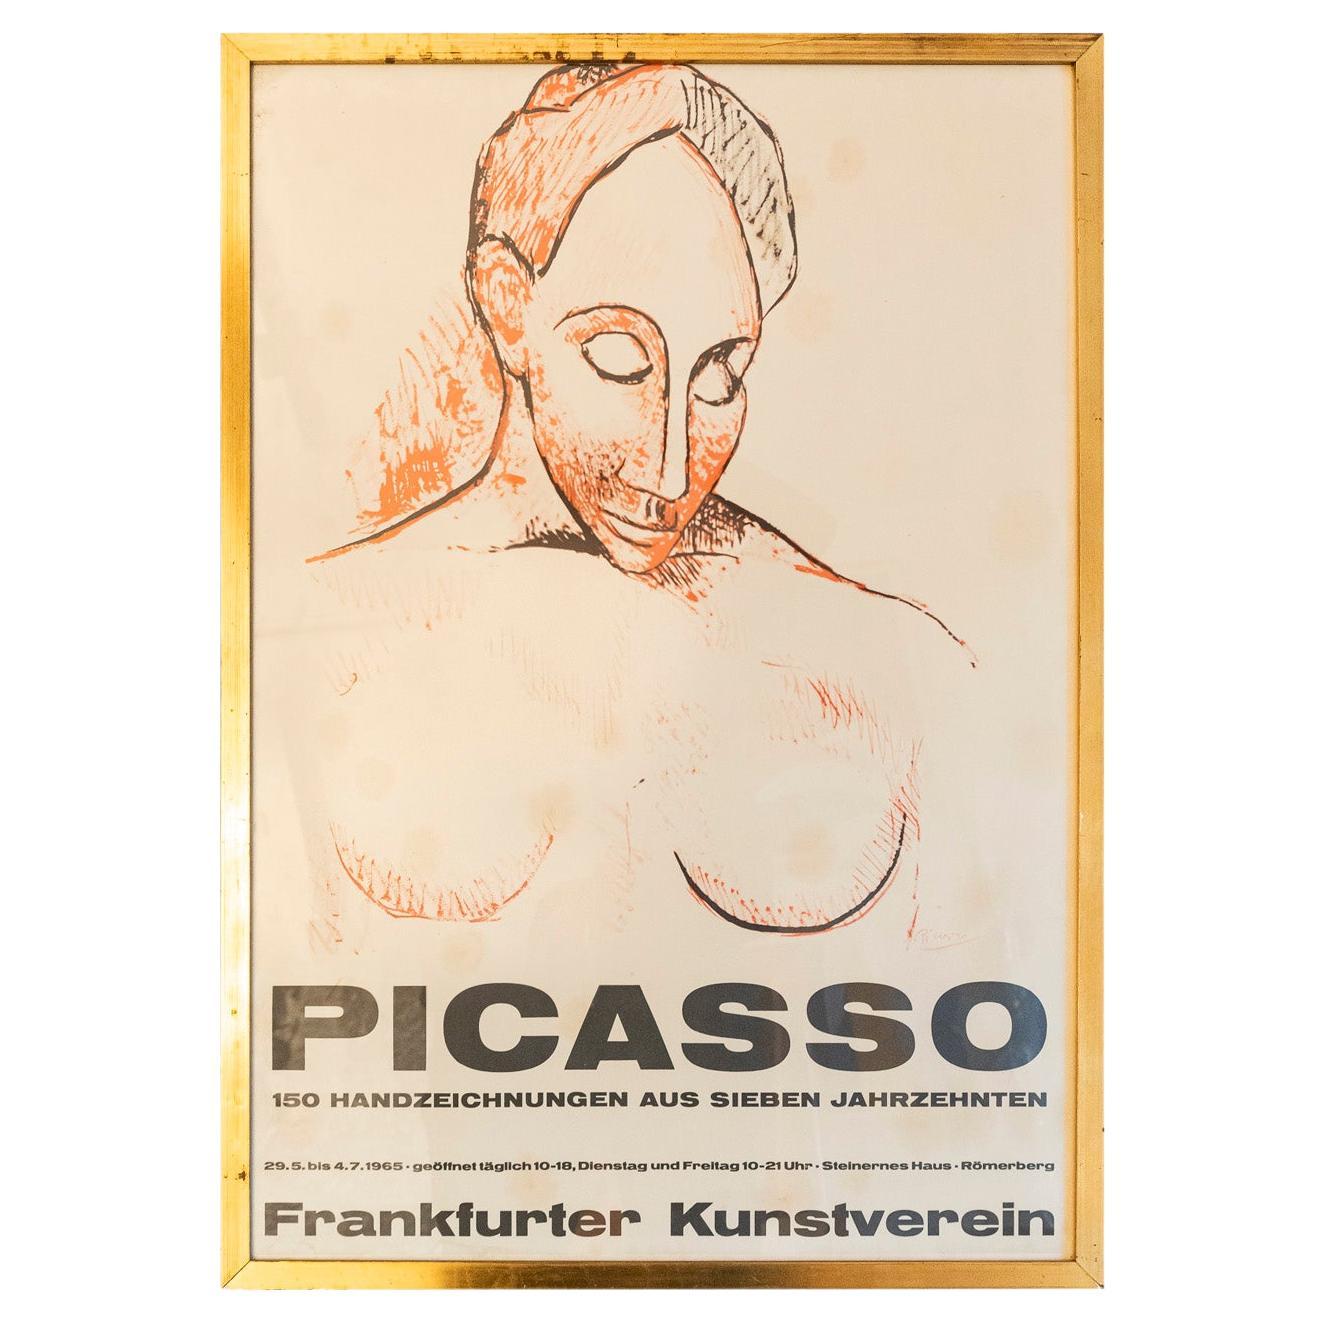 Original Exhibition Poster of Picasso, Germany, 1965 For Sale